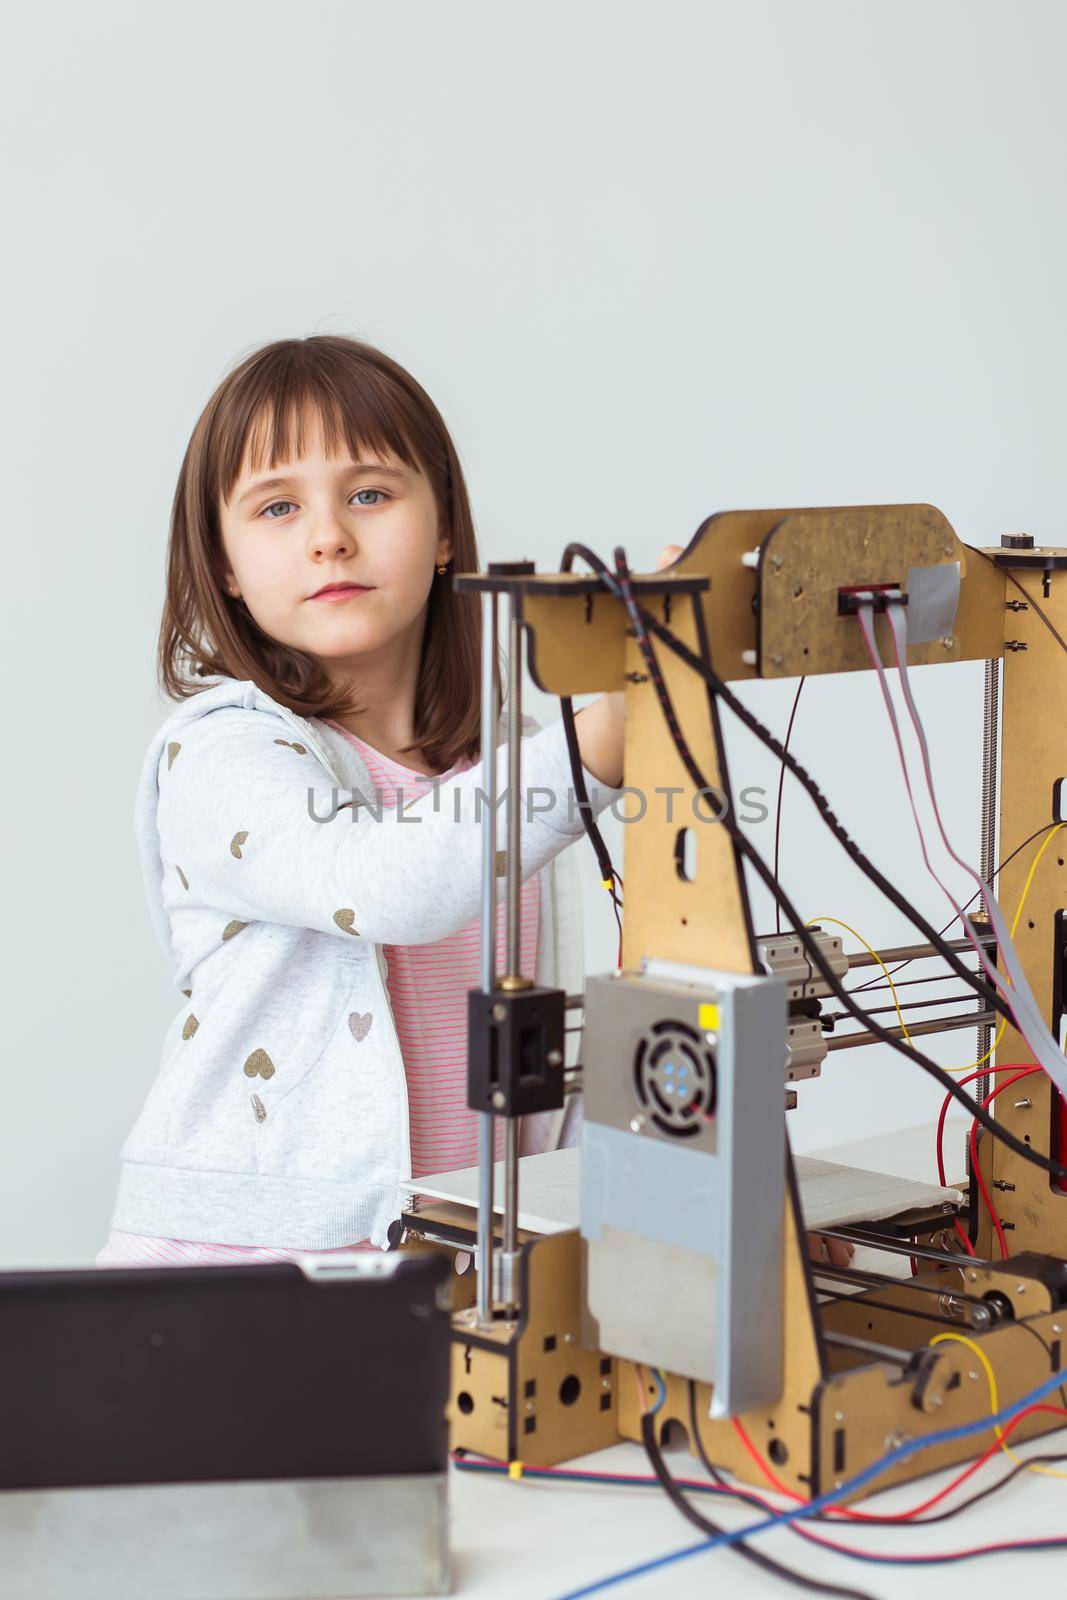 Cute girl with 3d printed shutter shades is watching her 3d printer as it prints her 3d model